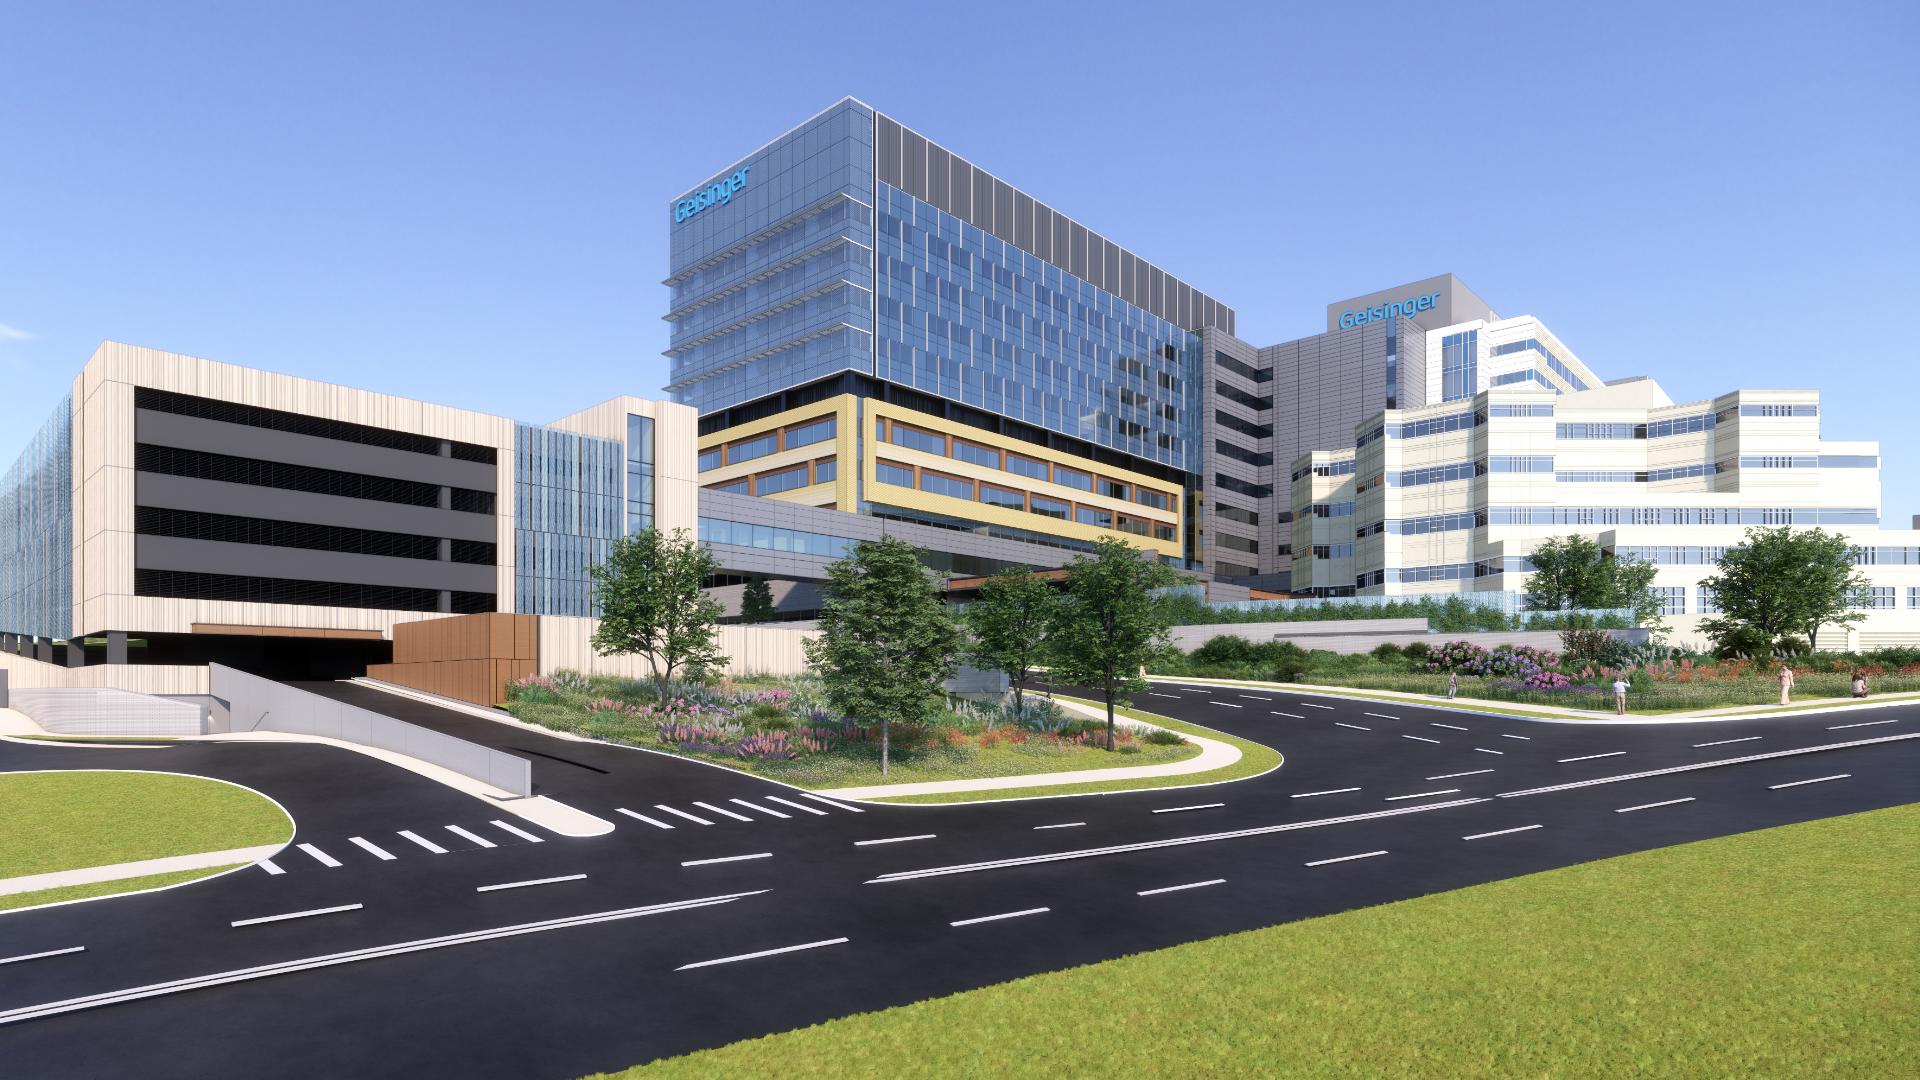 The project announced on Tuesday features an expanded ER, intensive care facilities, a parking garage, and a transition to 100% private patient rooms.